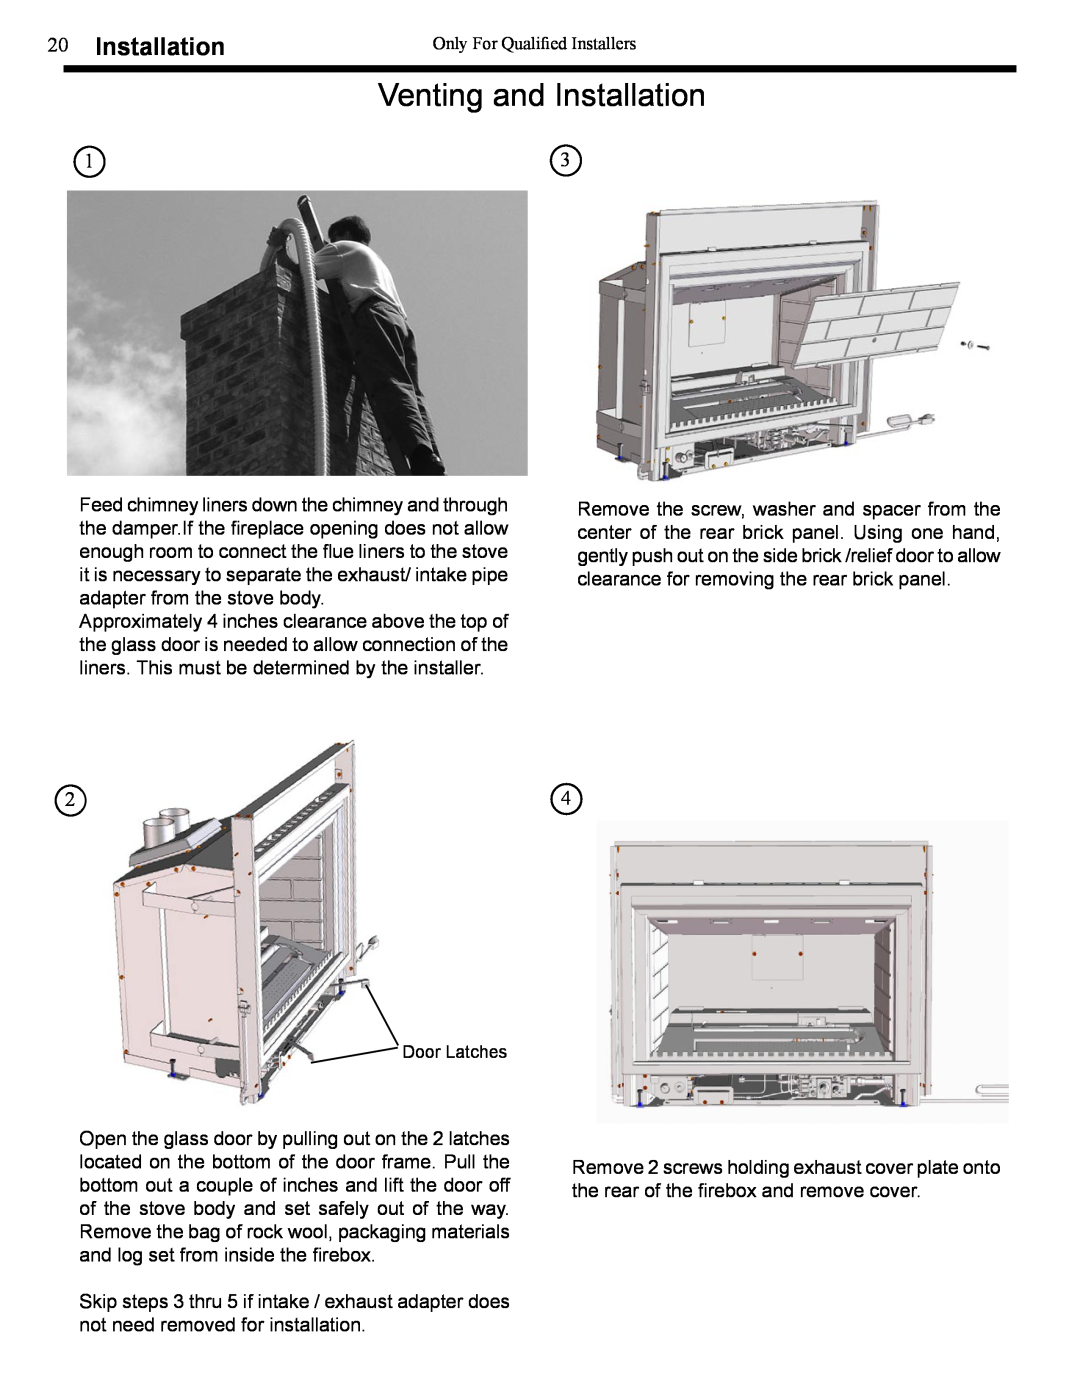 Harman Stove Company XL owner manual Venting and Installation 